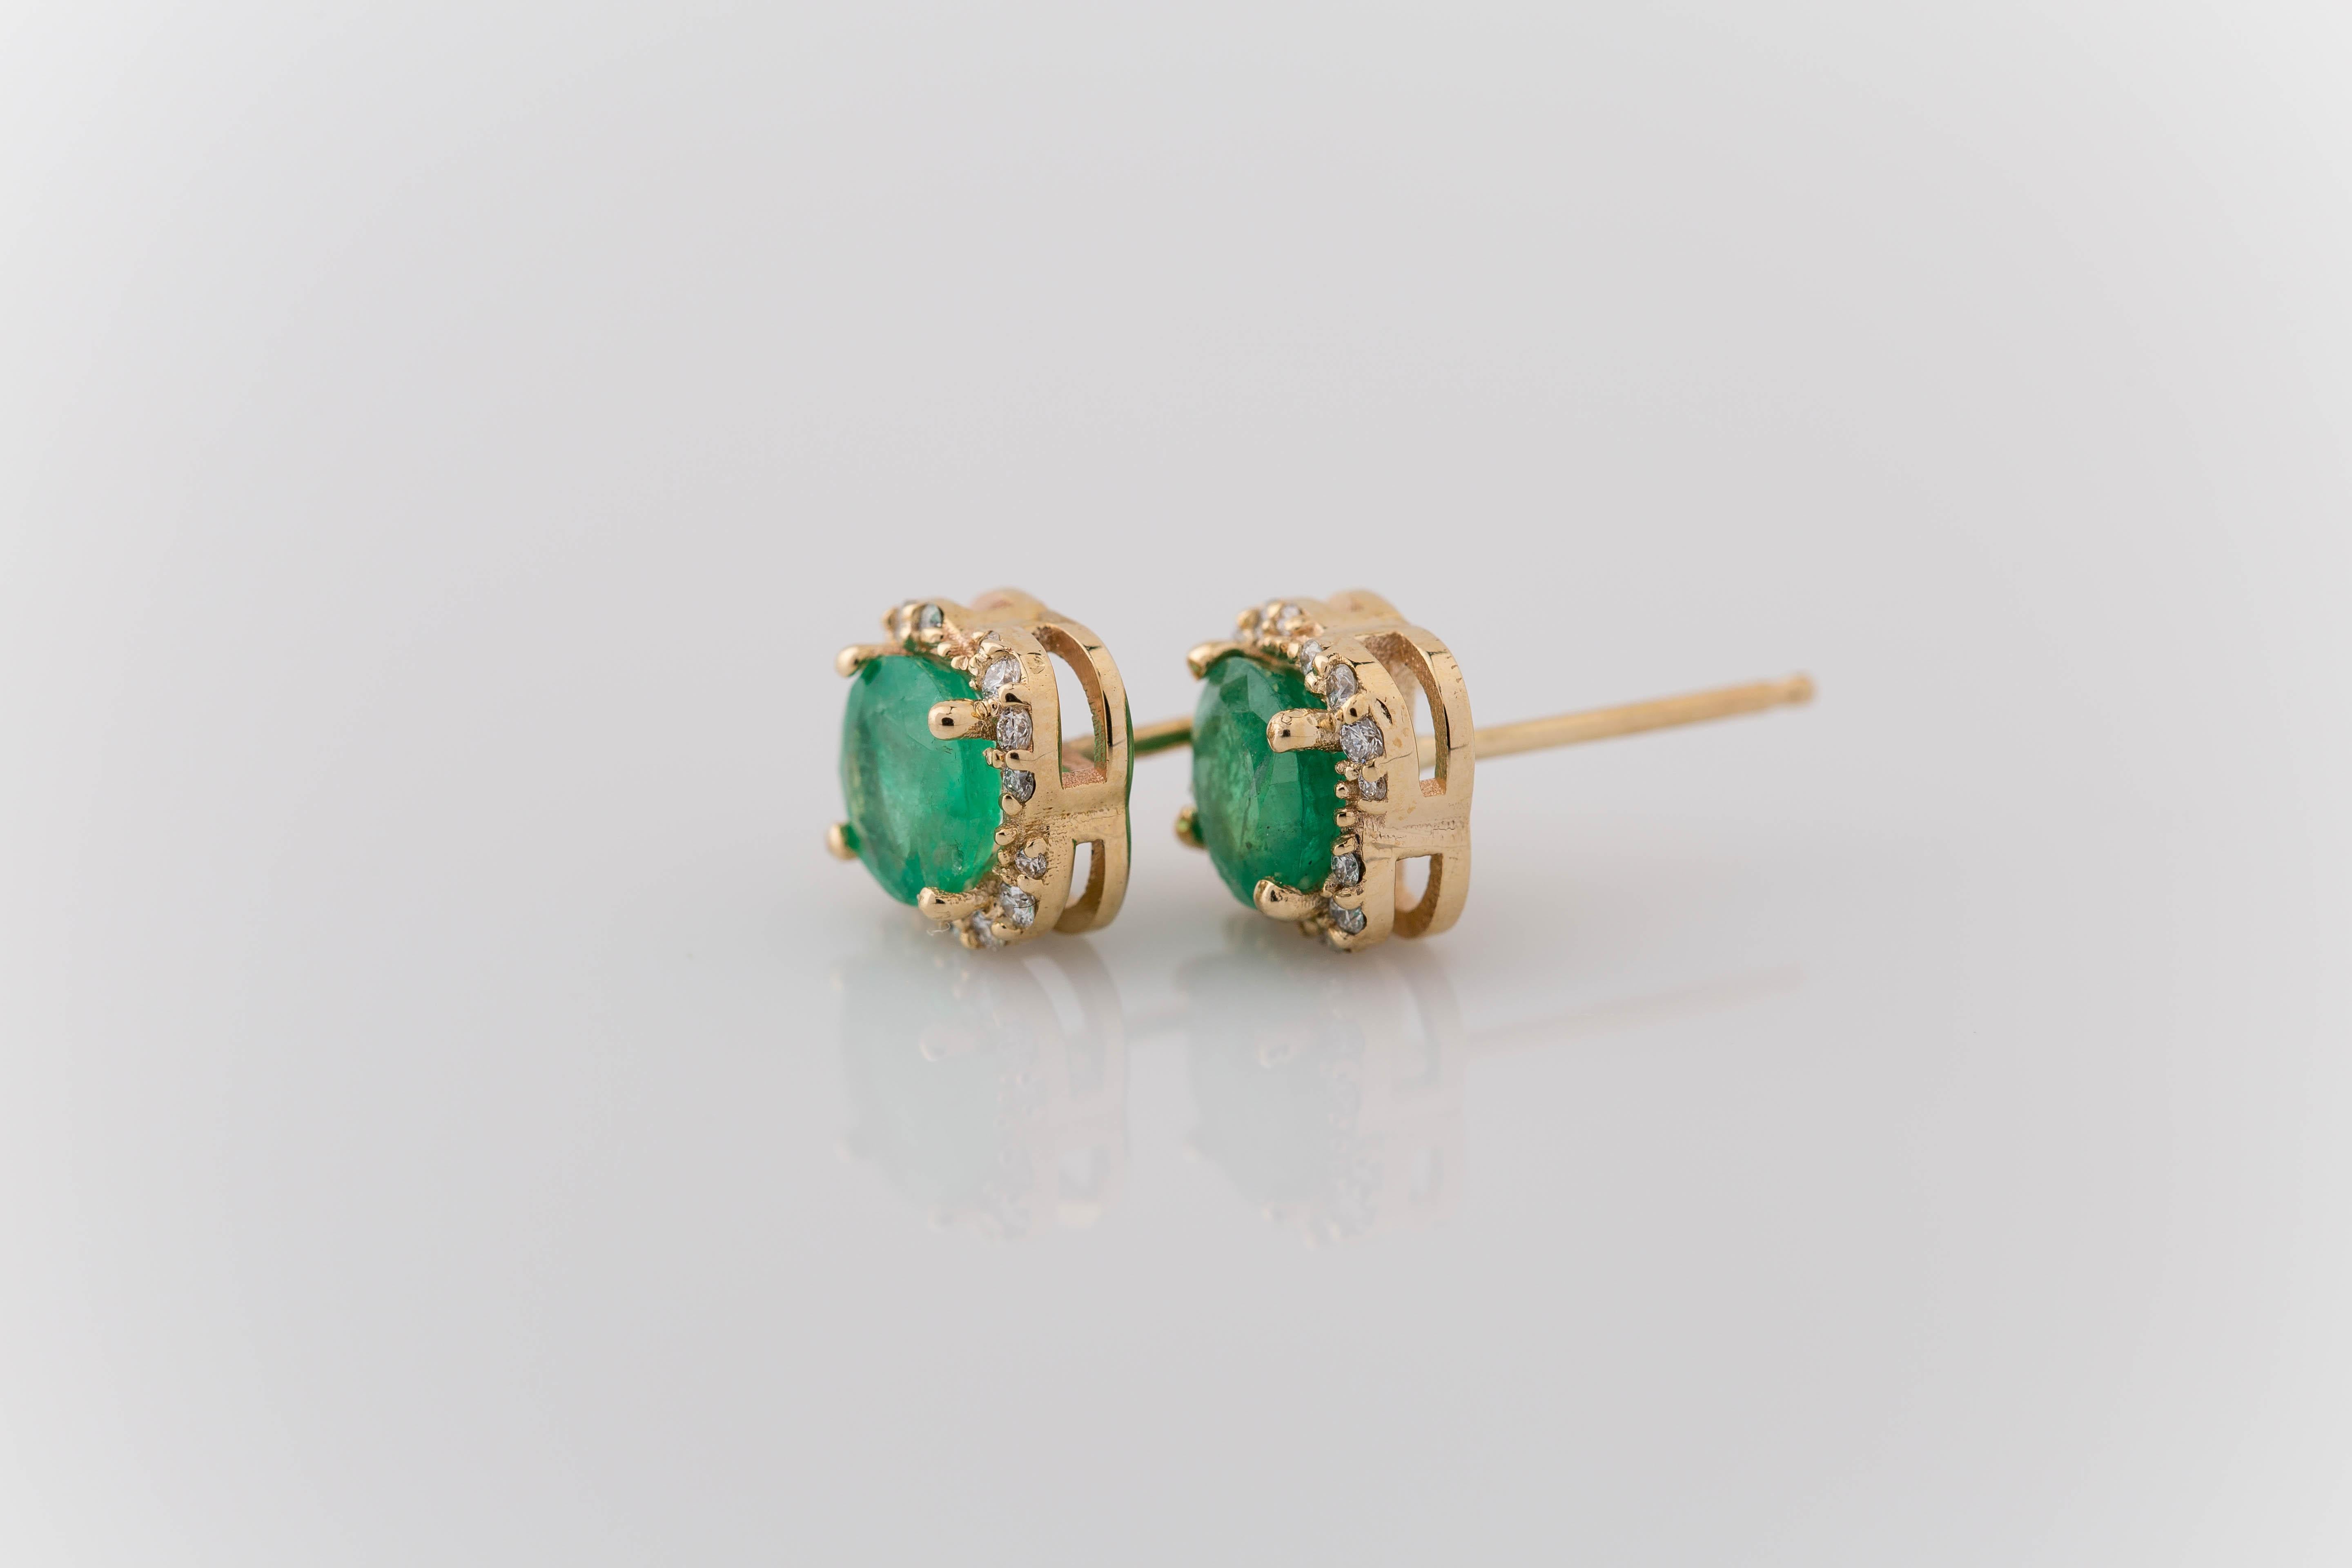 Introducing our elegant 1.62 Carat Emerald Diamond Halo Stud Earrings, where sophistication meets allure. Each earring features a dazzling 6mm round brilliant cut natural Brazilian emerald, evoking the lush greens of nature's landscapes. Encircling